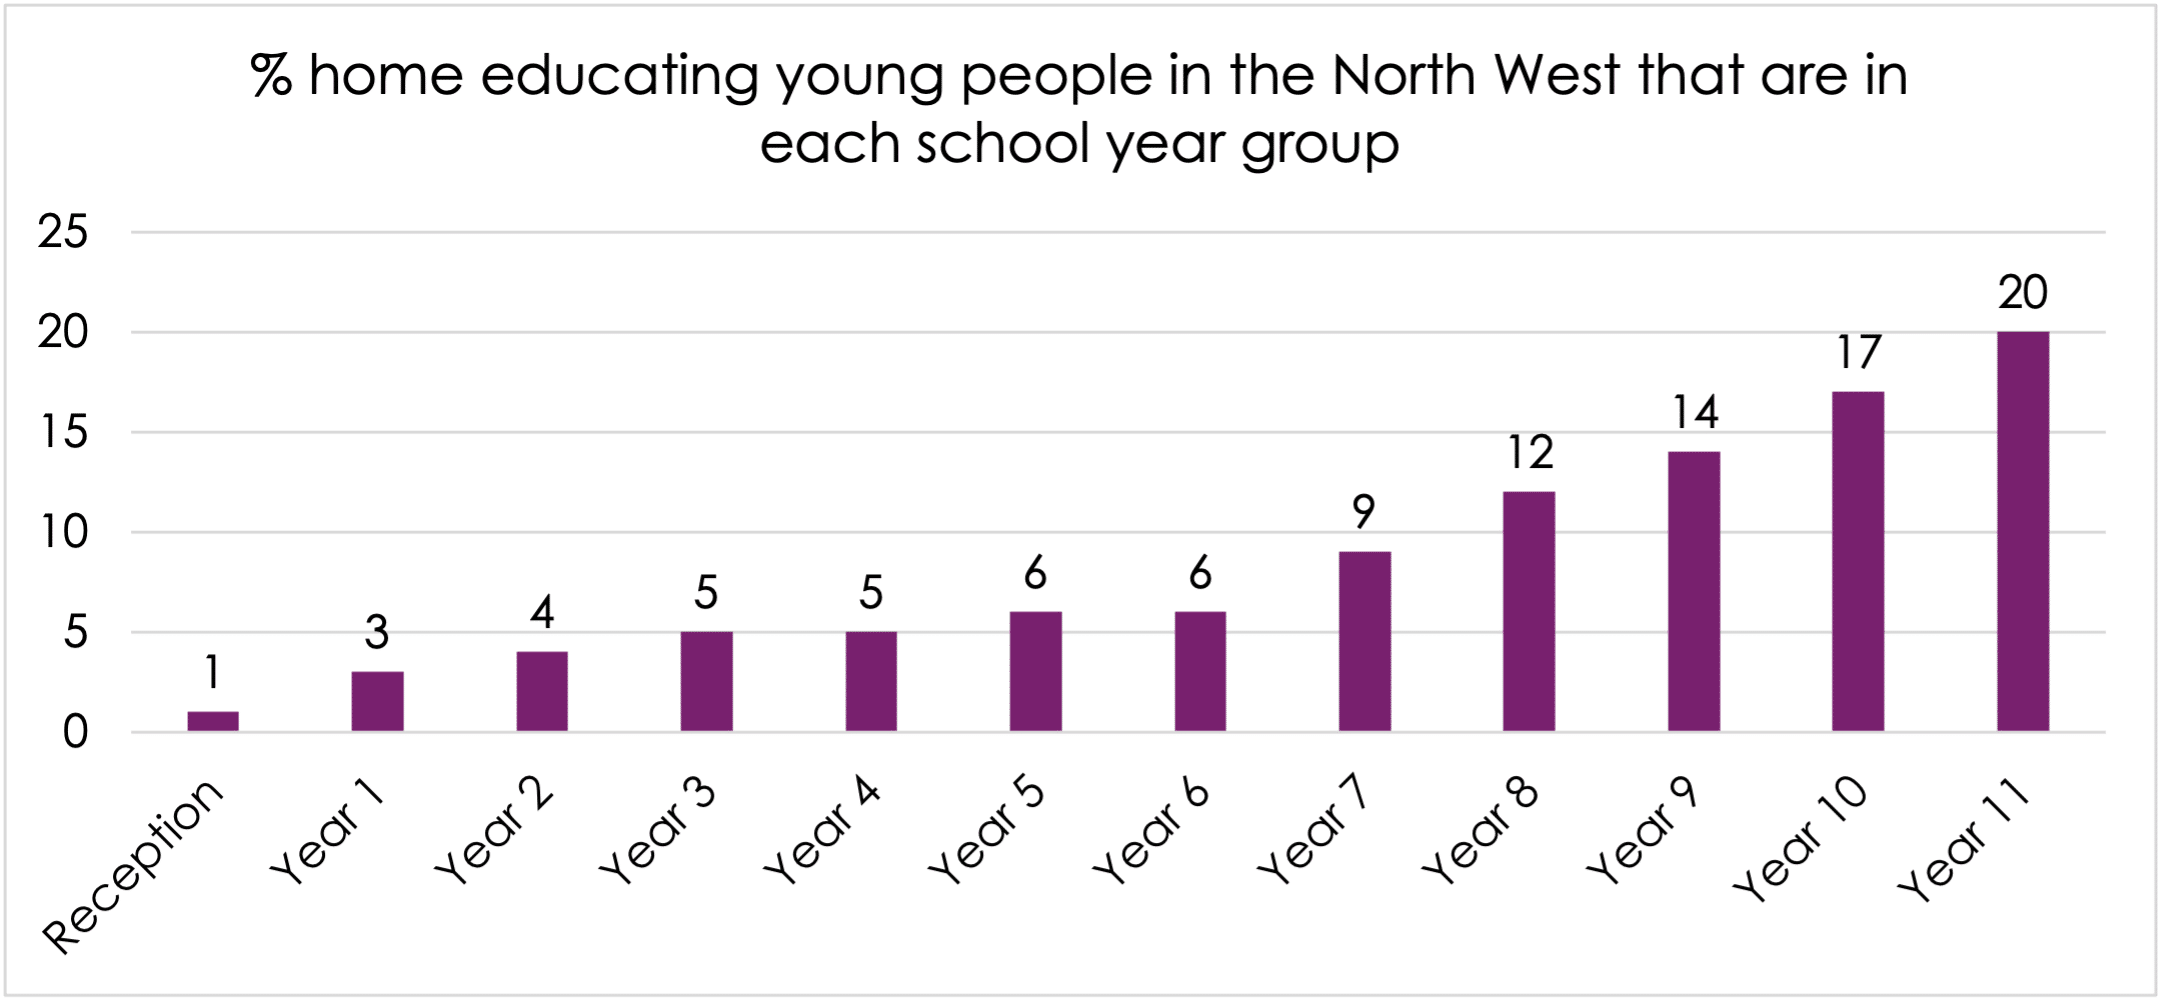 This chart shows the breakdown of the percentage of north west young people who are home educating for each school year group. It goes from 1% at reception year and gradually rises to 6% at year 6. From year 7 it goes from 9% up to 20% at year 11.